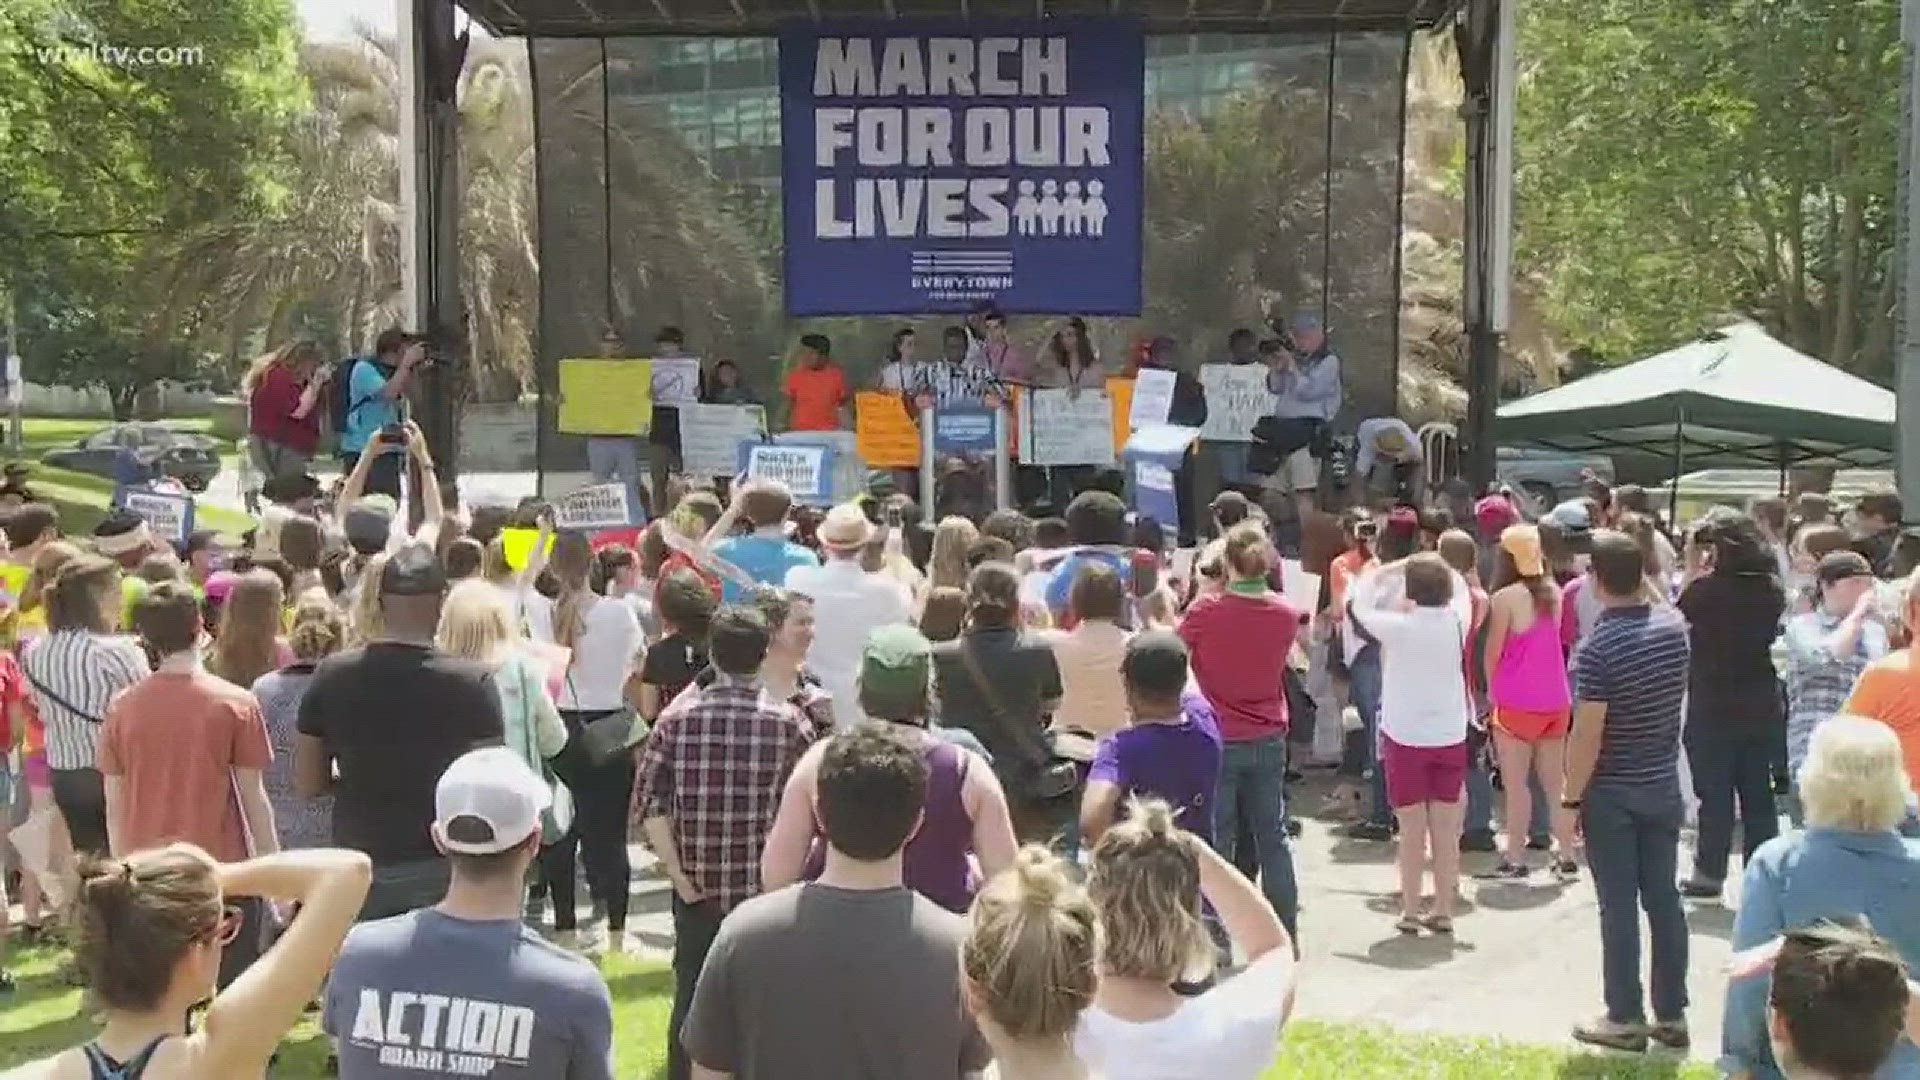 Crowds of people took to the streets, rallying to protest gun violence at schools.